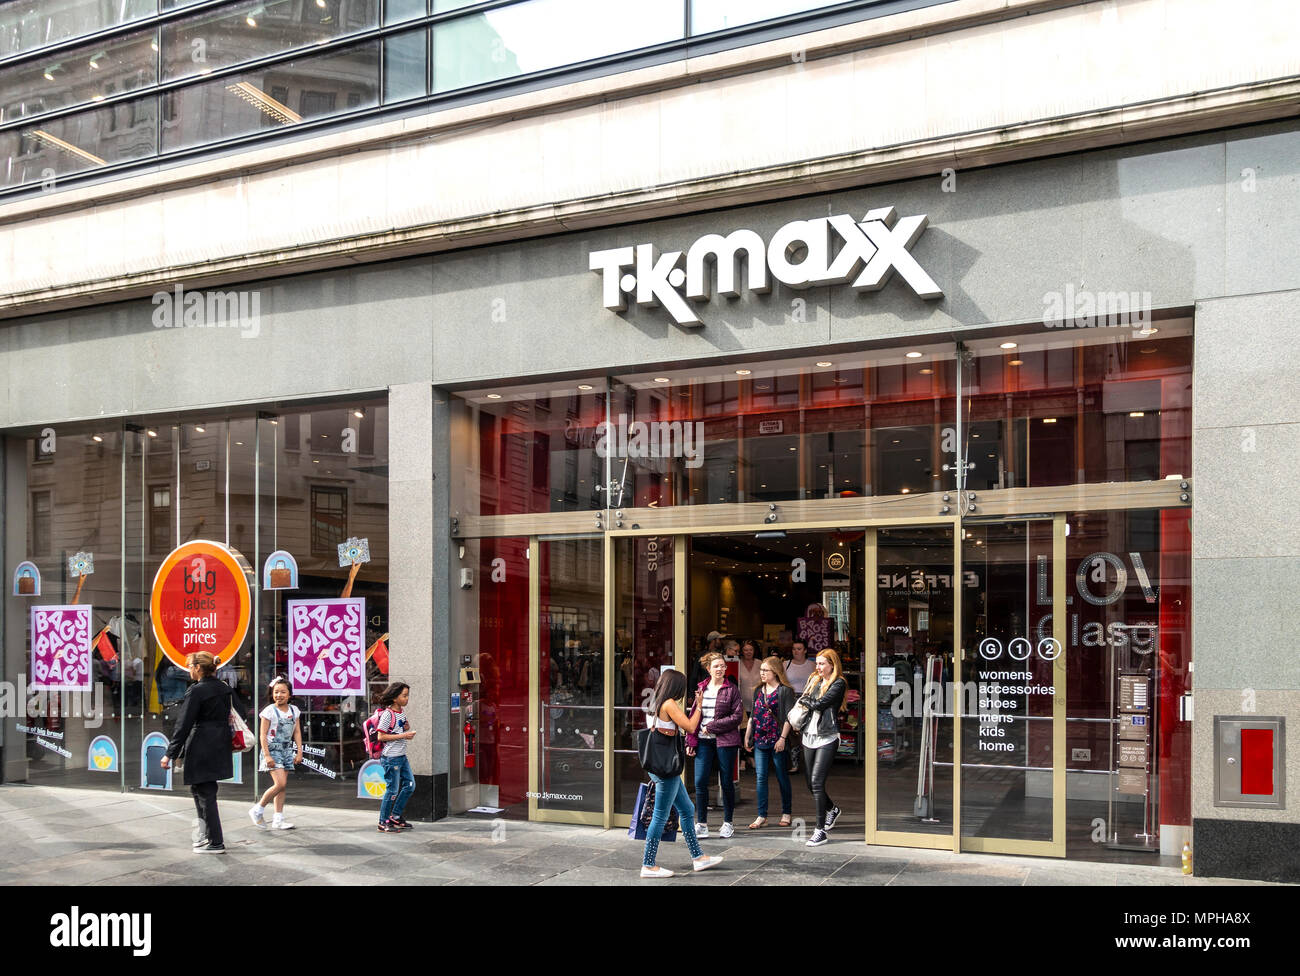 Customers entering and leaving the T.K.Maxx discount fashion and homewear shop branch in Argyle Street, central Glasgow, Scotland, UK Stock Photo